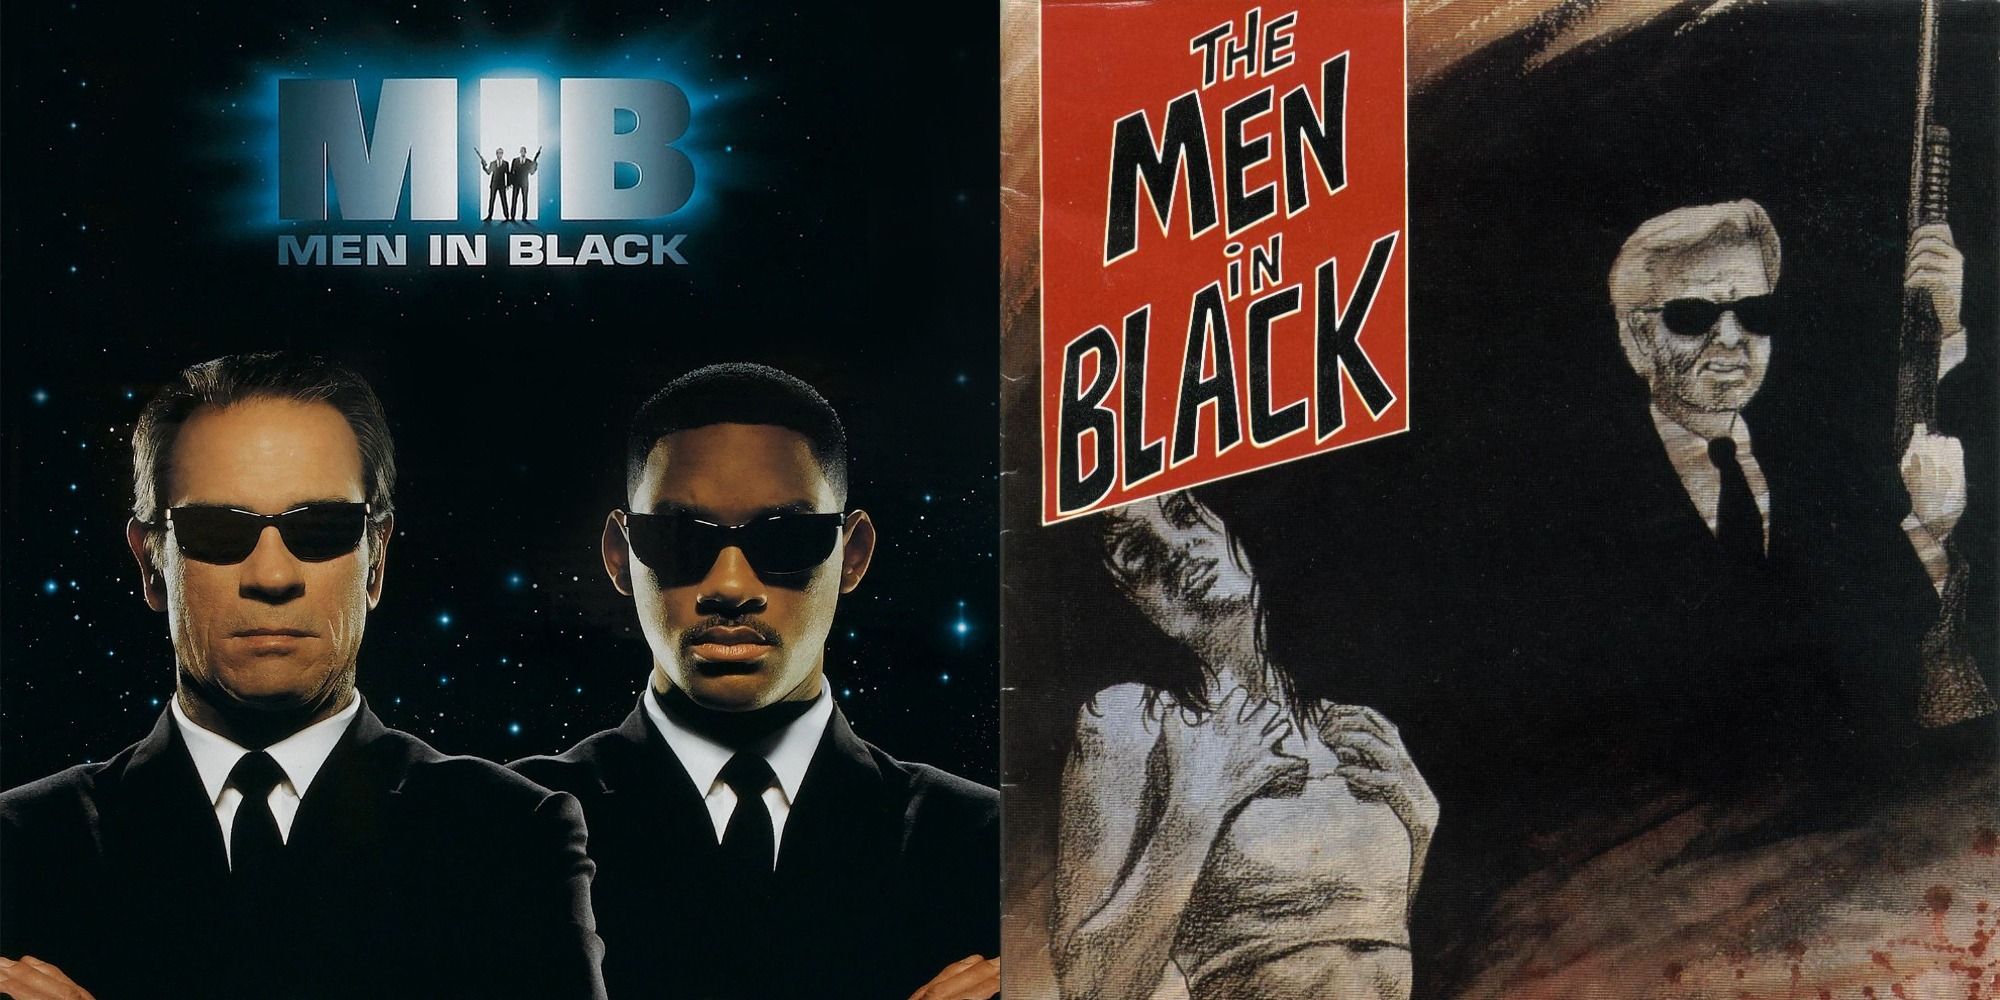 combined image of Will Smith in the poster of Men in Black and the comic it is based on